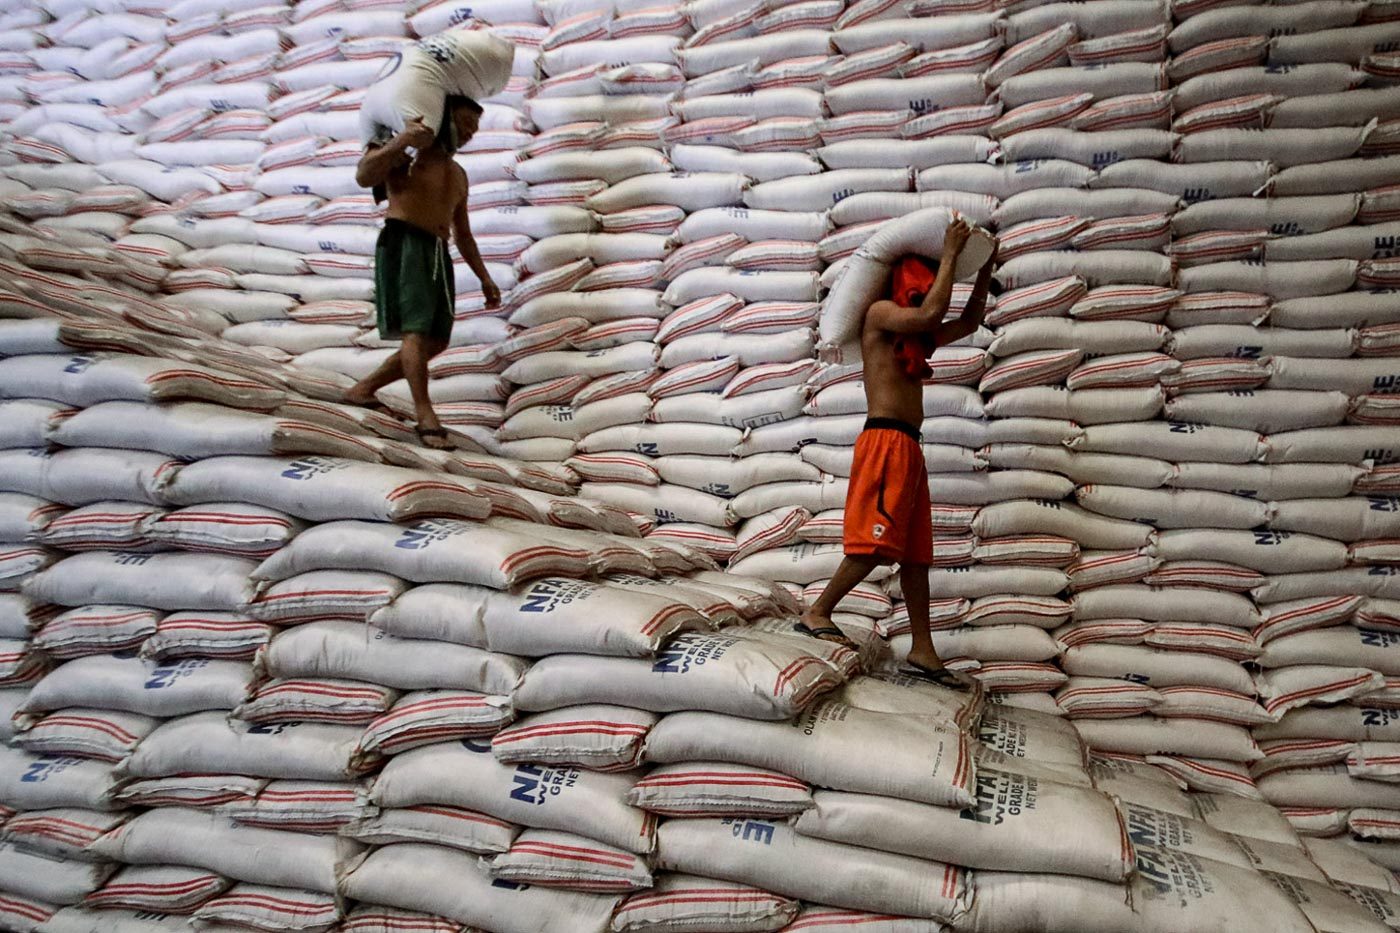 Government to set SRPs for imported, local rice